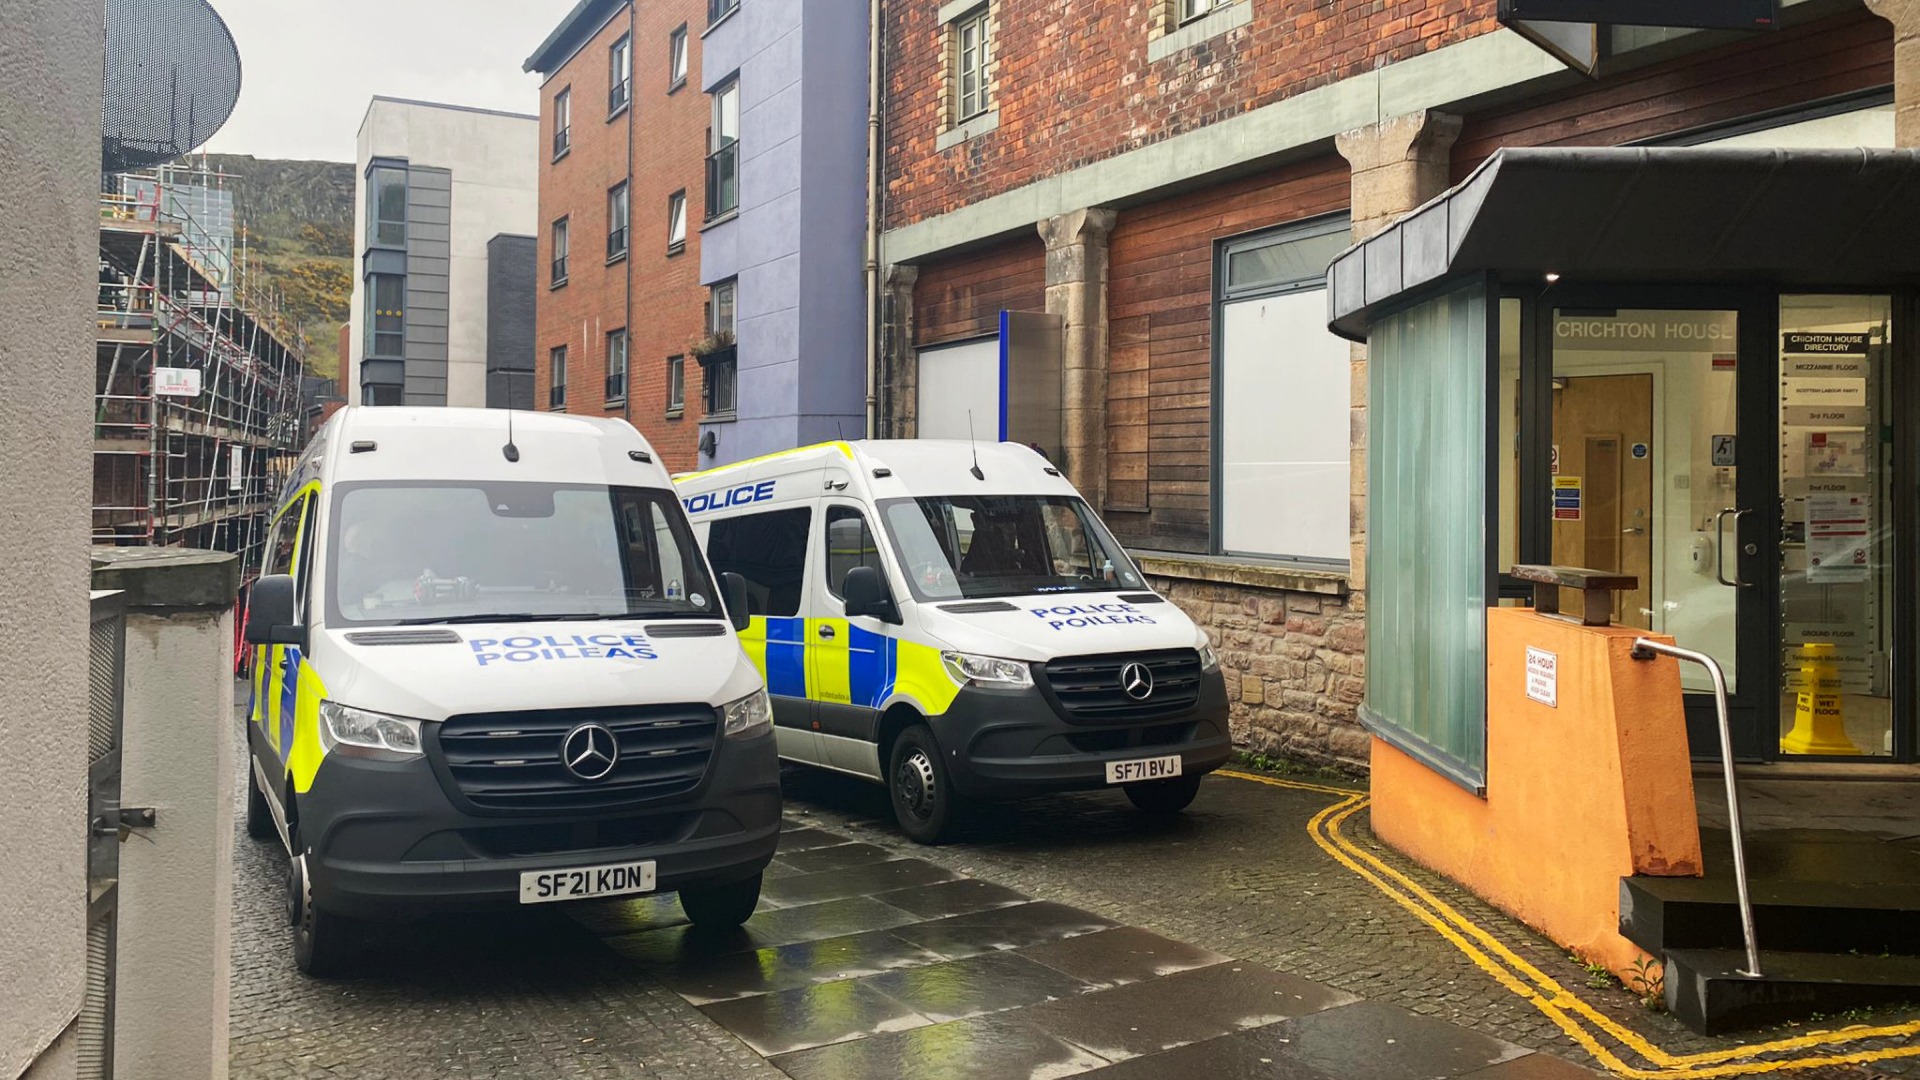 Police raided the SNP's Edinburgh offices earlier this month as part of their investigation into the party's finances.